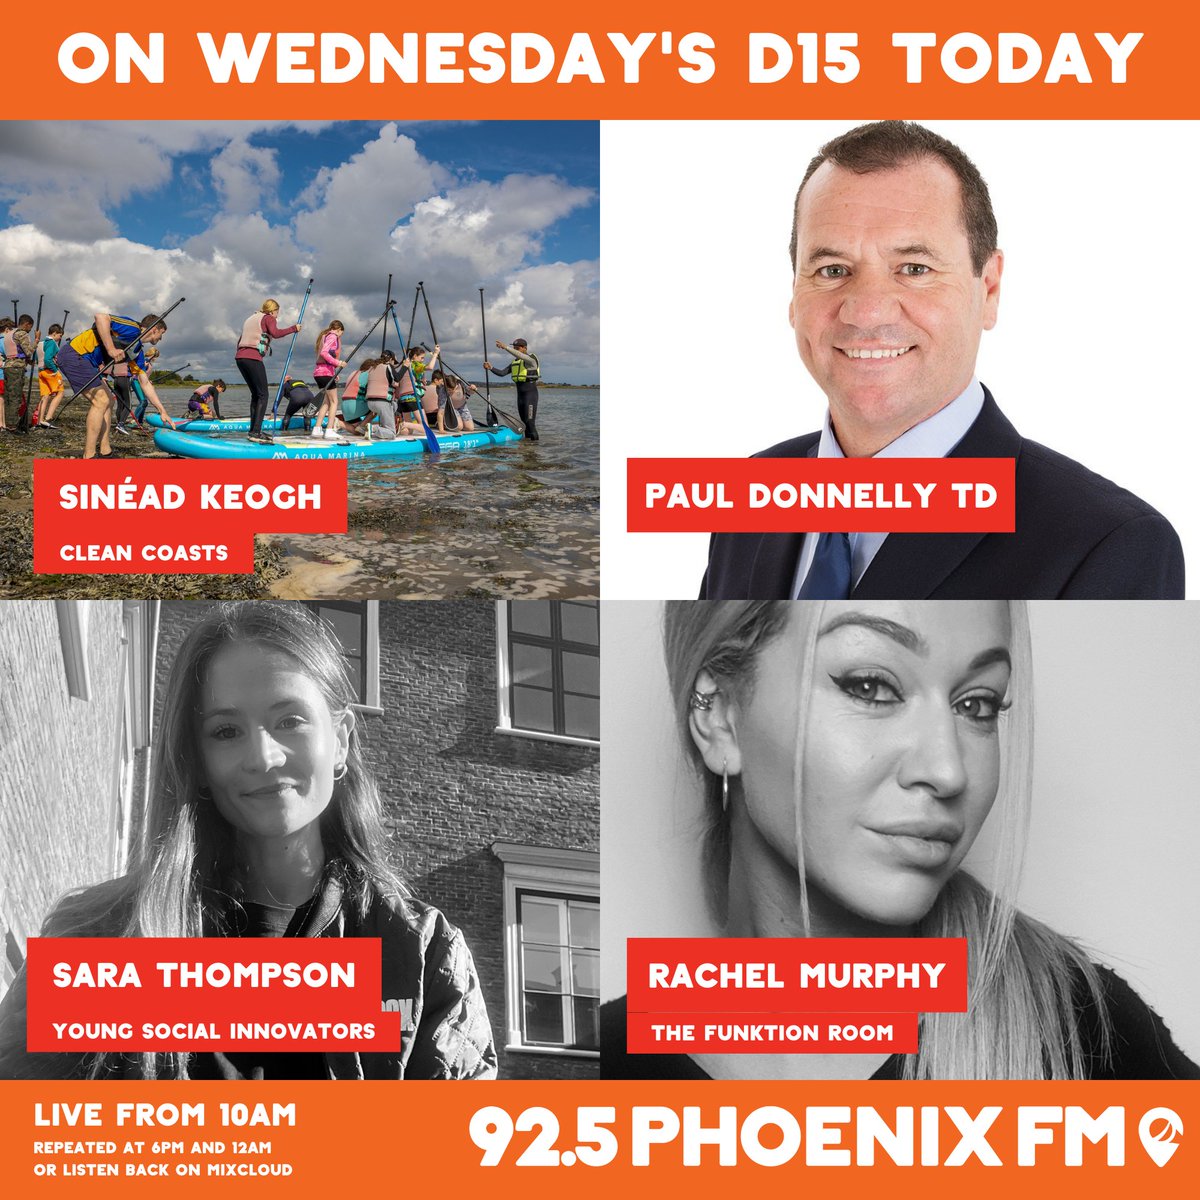 On Wednesday's D15 Today: - Baldoyle Bay Biosphere Festival with @CleanCoasts - @pauldonnellysf on planned tax hikes on petrol - @YSInow's annual awards - The Funktion Room's dance studio and classes Tune in from 10am on 92.5 FM and online at live.phoenixfm.ie!